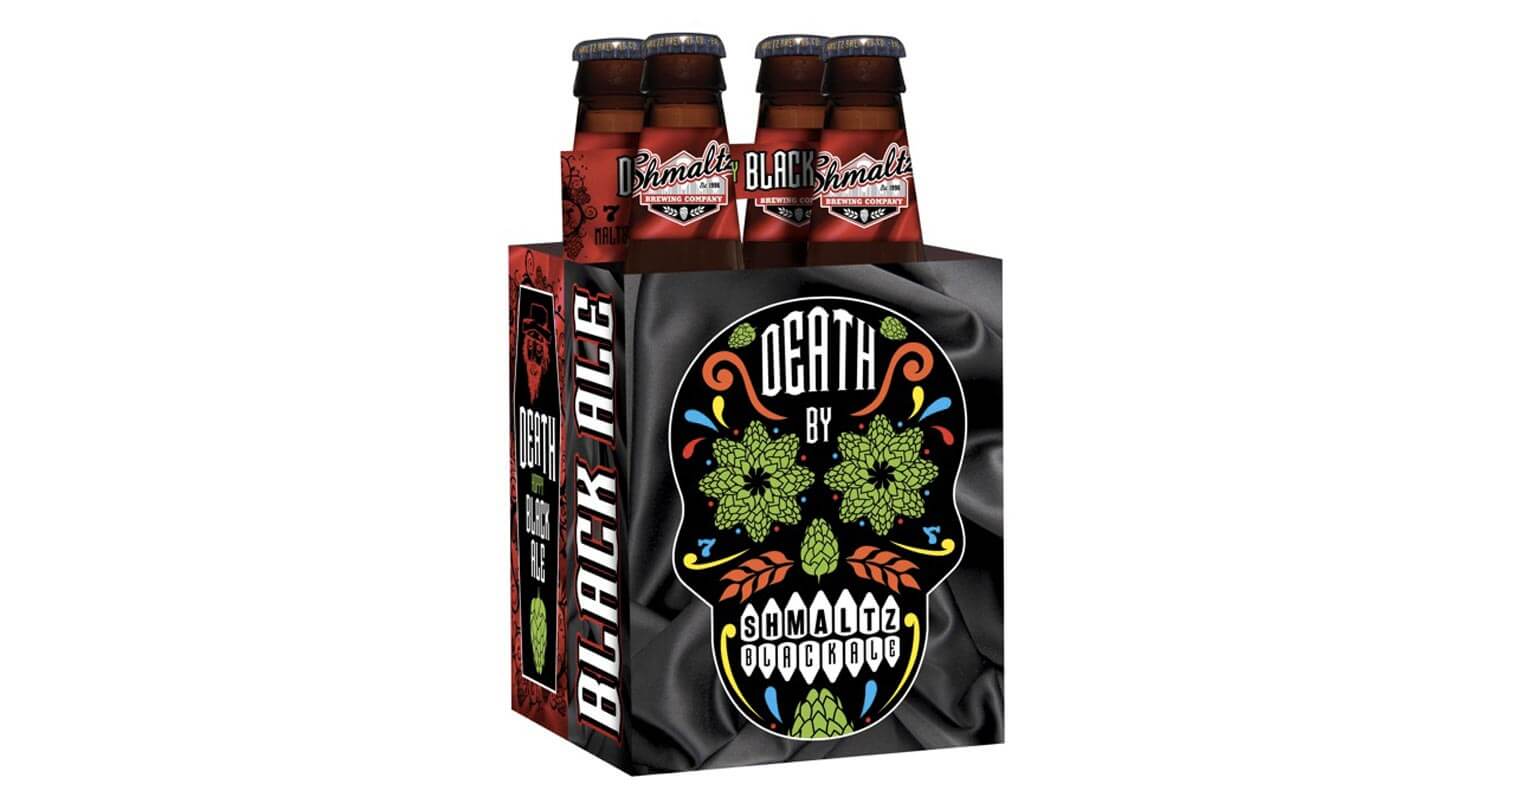 Shmaltz Brewing Company Releases Death Hoppy Black Ale, featured image